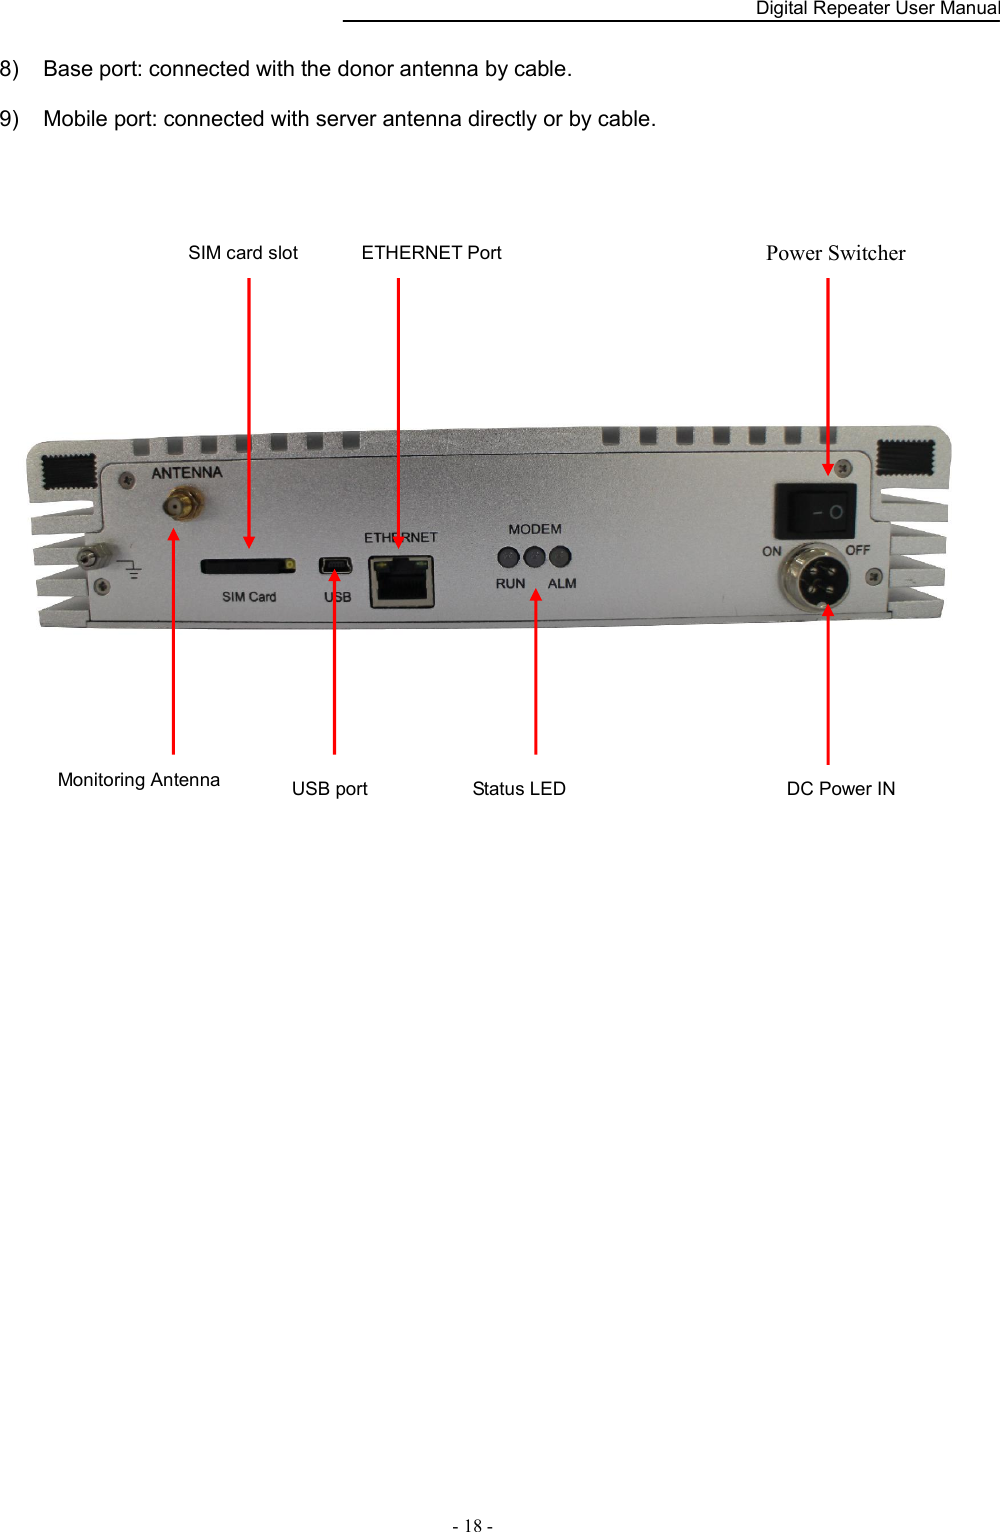    Digital Repeater User Manual  - 18 -   8)  Base port: connected with the donor antenna by cable. 9)  Mobile port: connected with server antenna directly or by cable.     Monitoring Antenna  USB port  Status LED ETHERNET Port SIM card slot  Power Switcher DC Power IN 